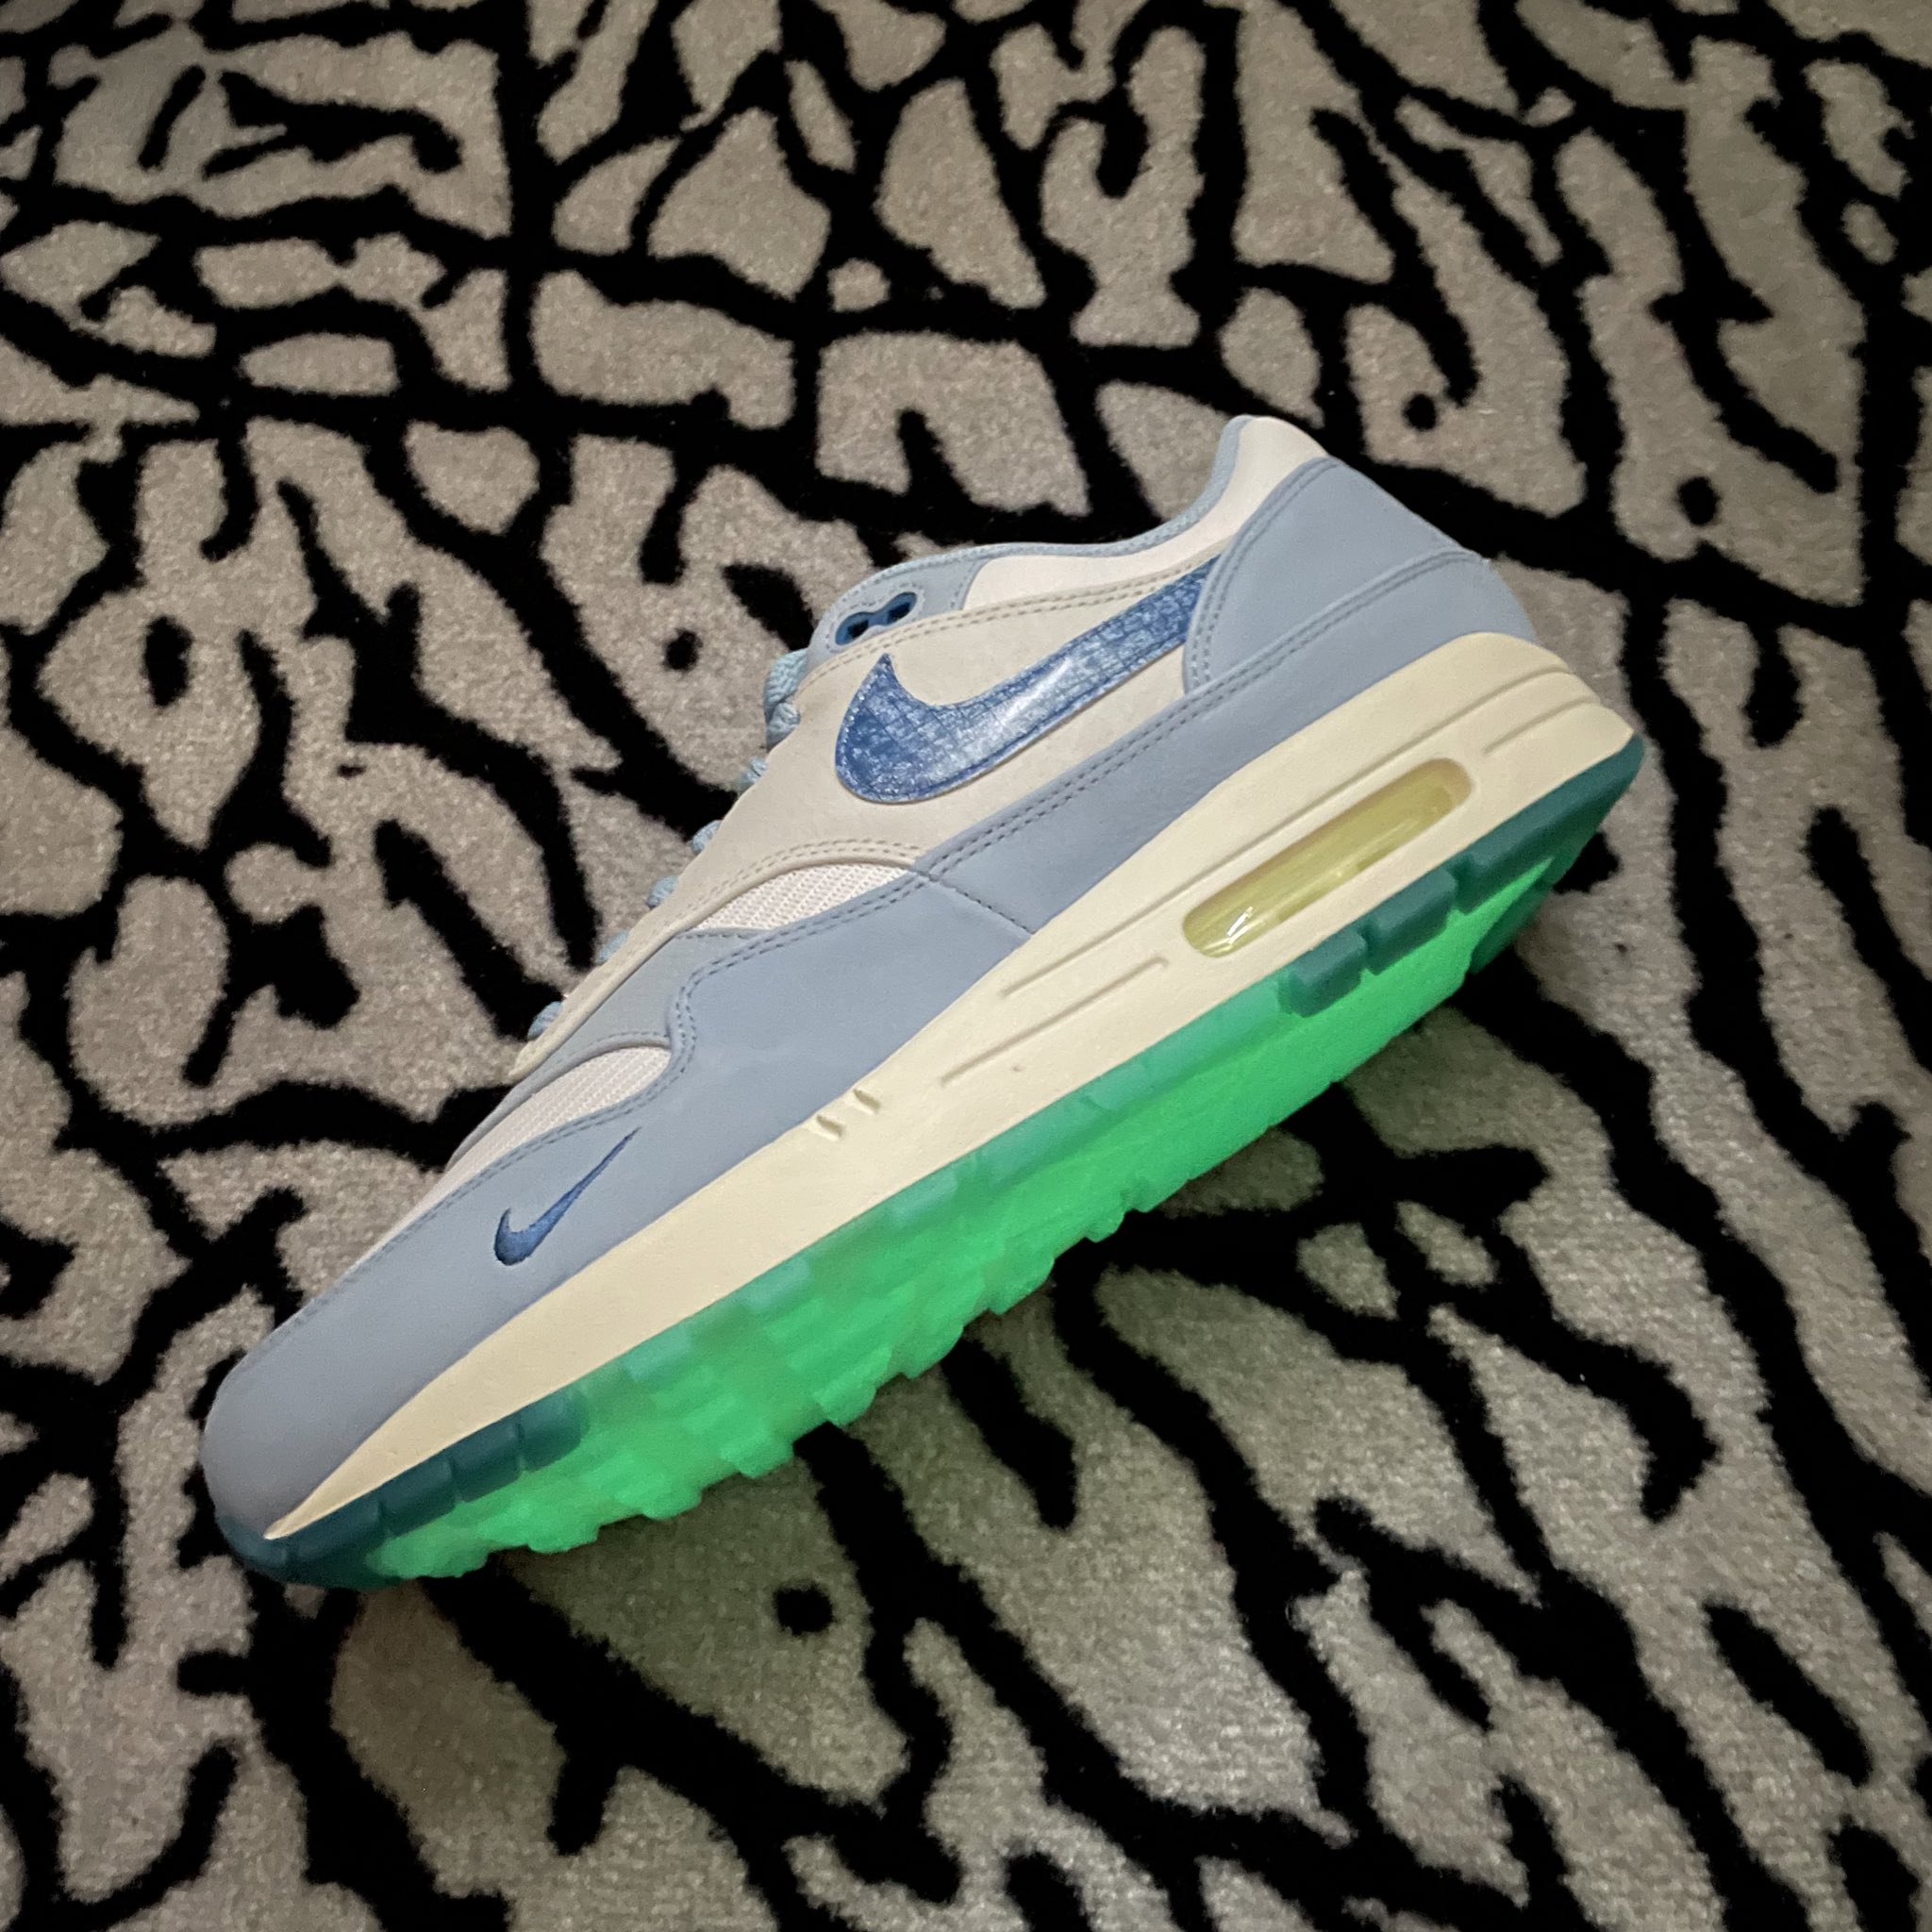 sockjig on X: "Blueprint Air Max 1 has a glow the sole by the way https://t.co/JtMfWUNz6S" X